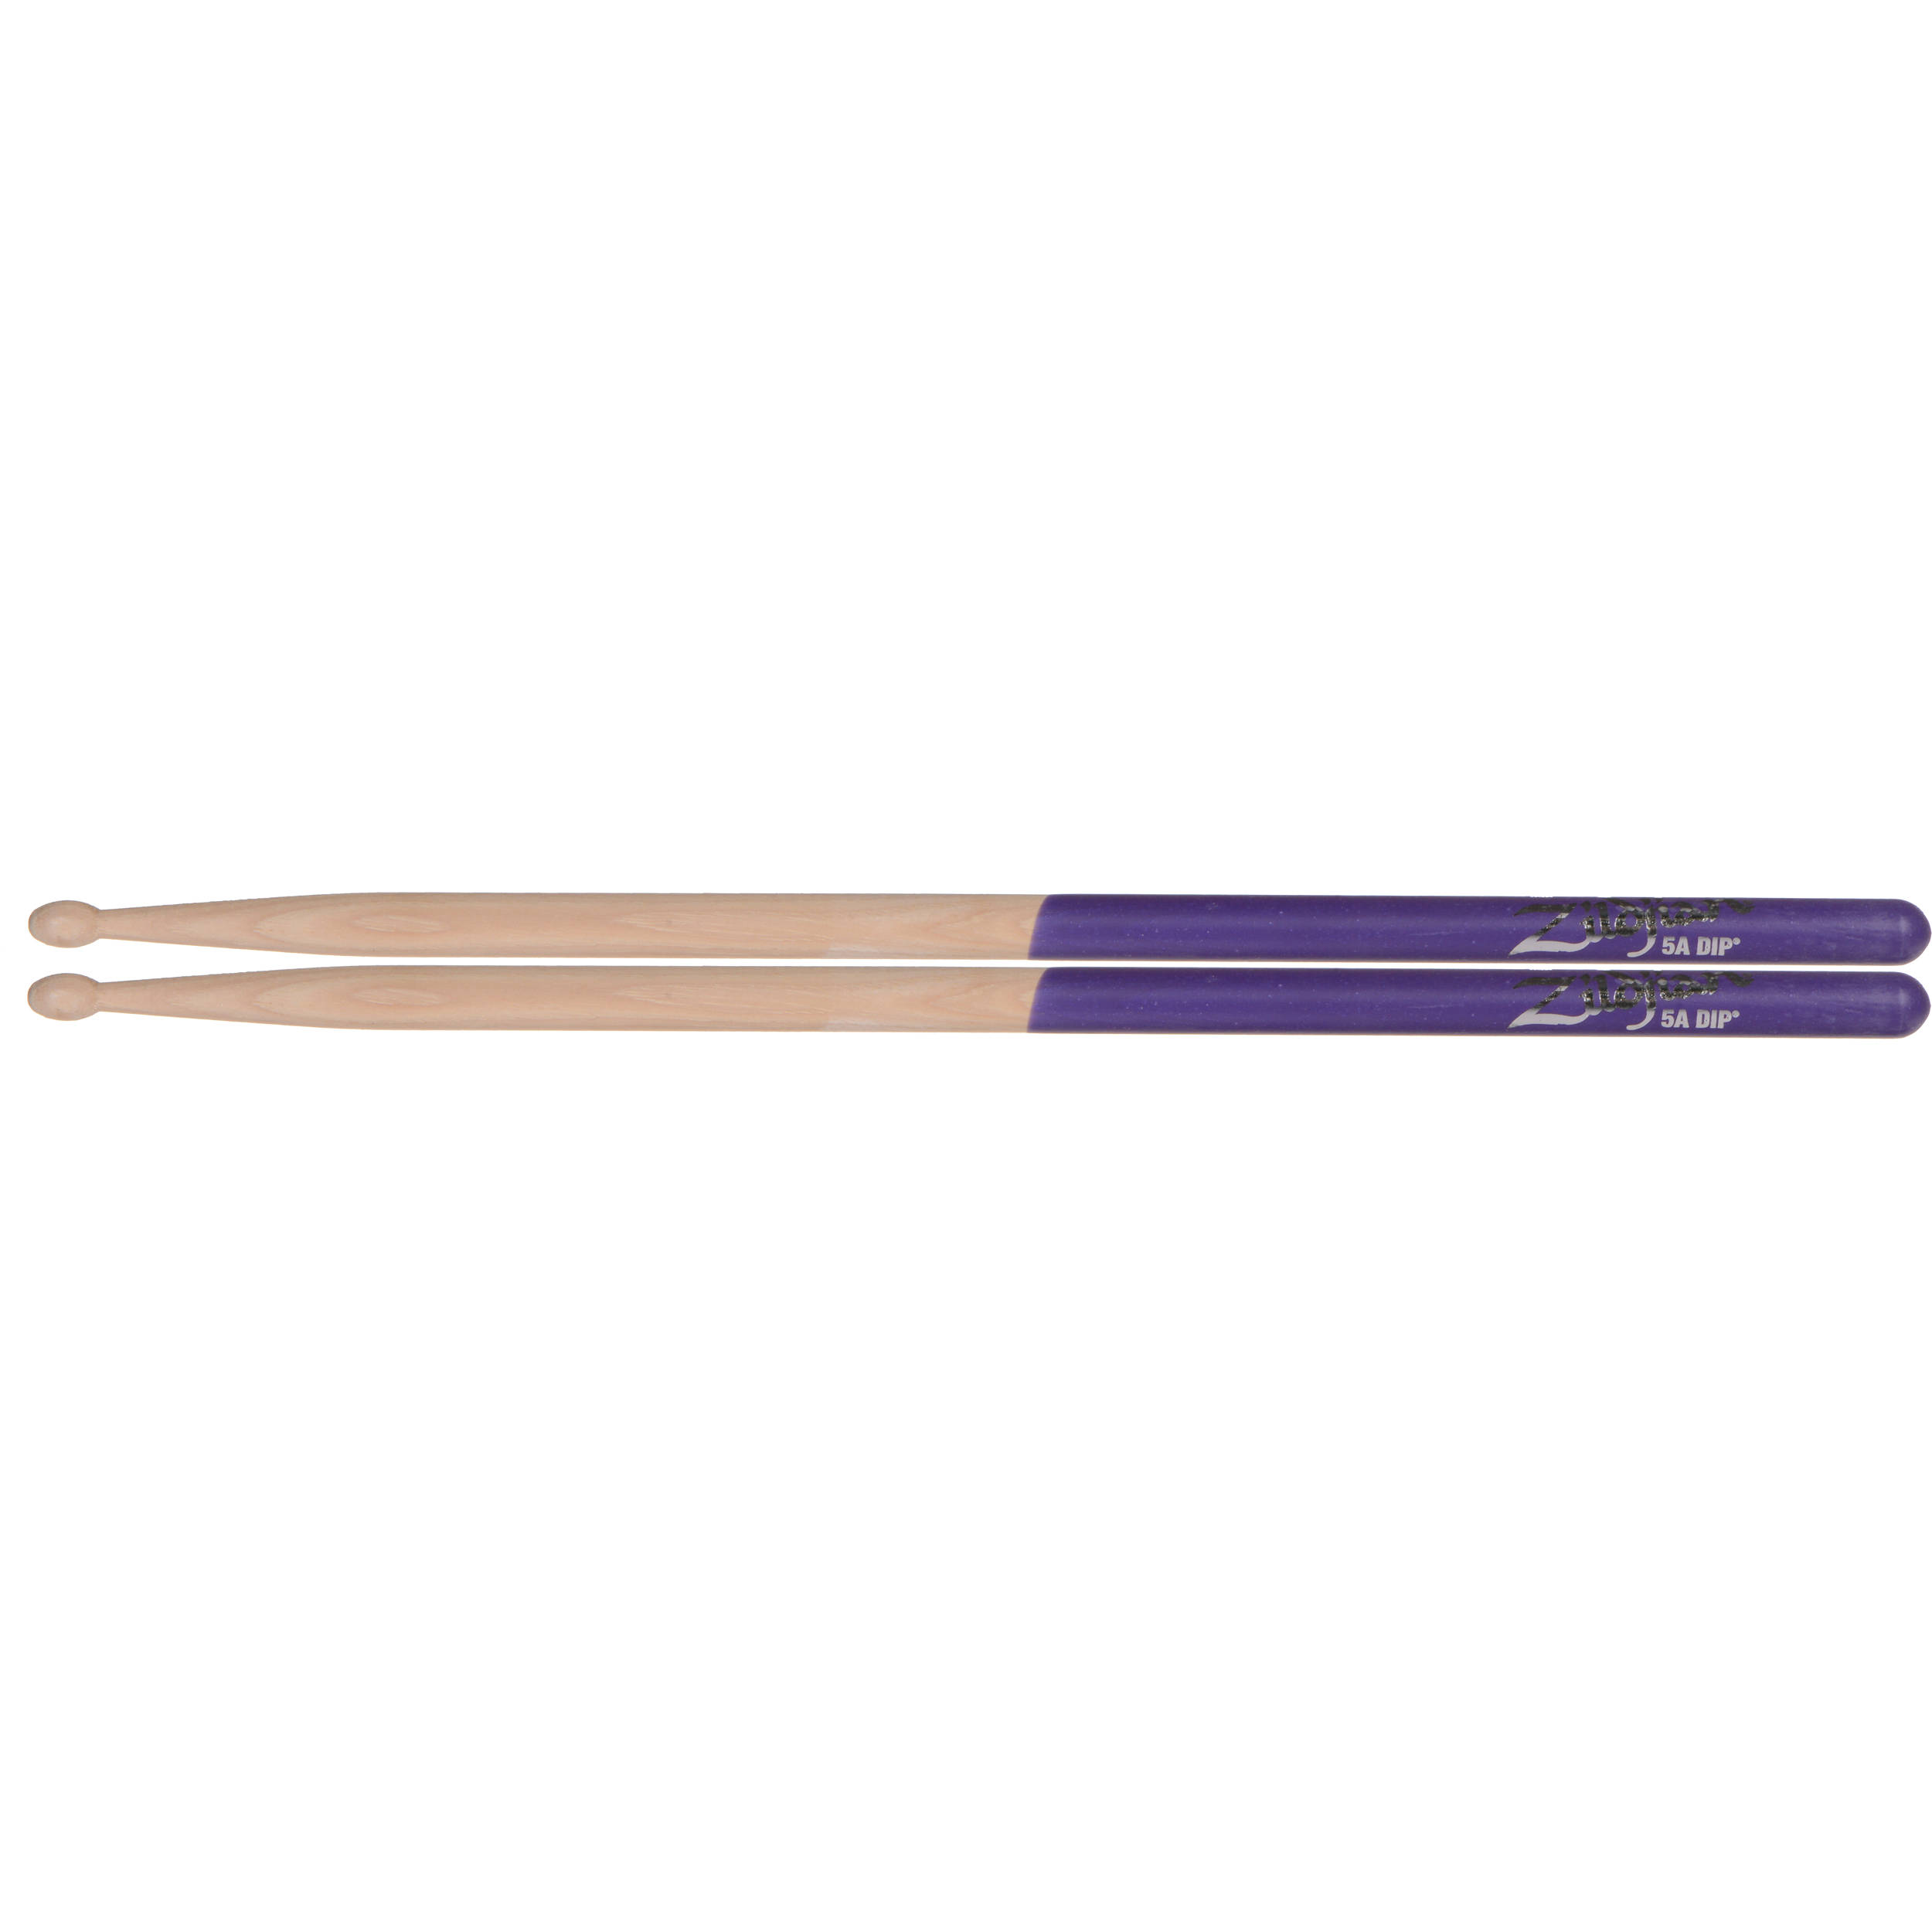 Download Zildjian 5a Hickory Drumsticks With Oval Wood Tips 5awp 1 B H